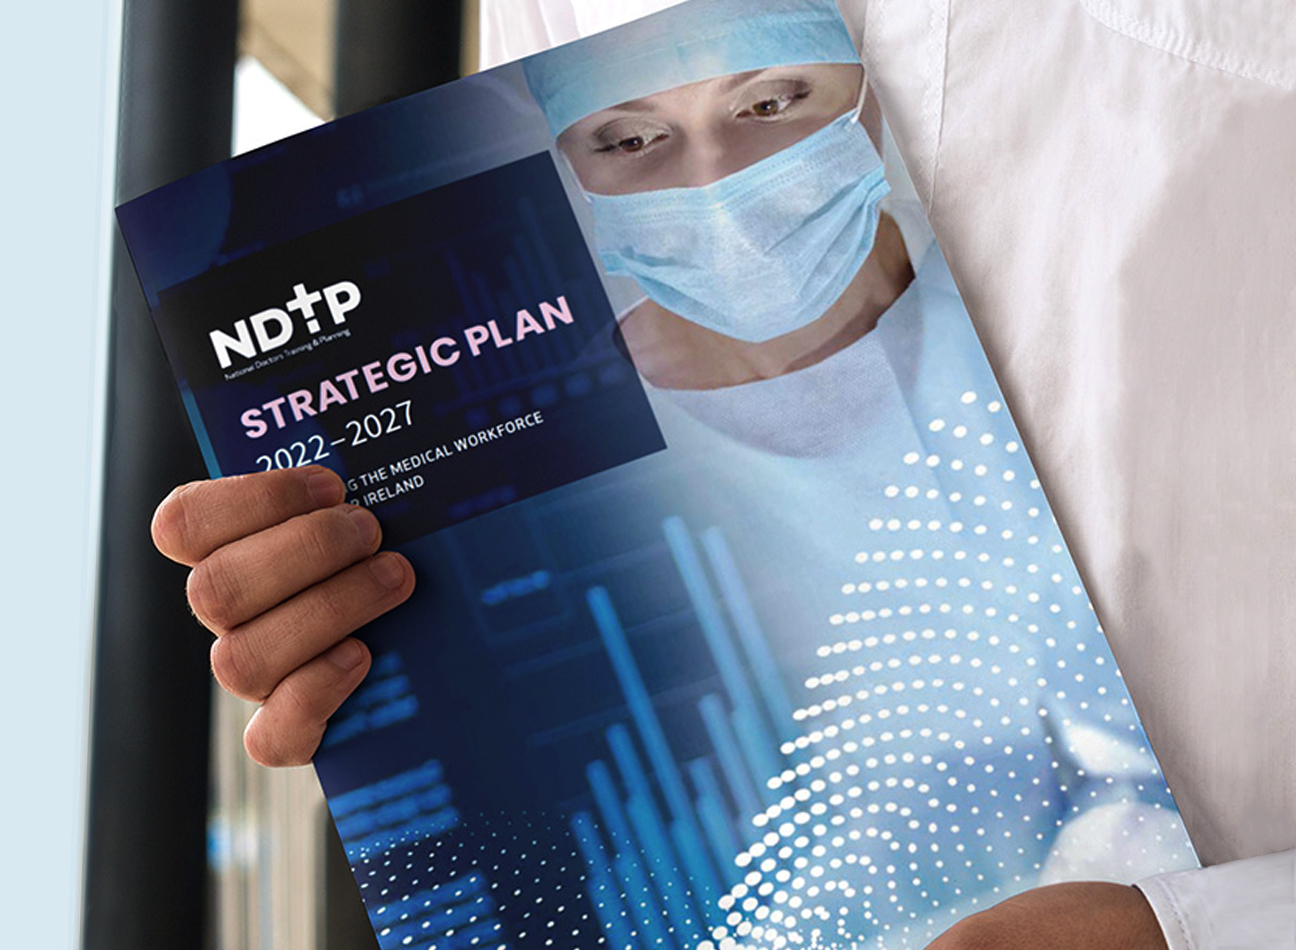 Man holding a report showing the cover with an image of a surgeon wearing a mask